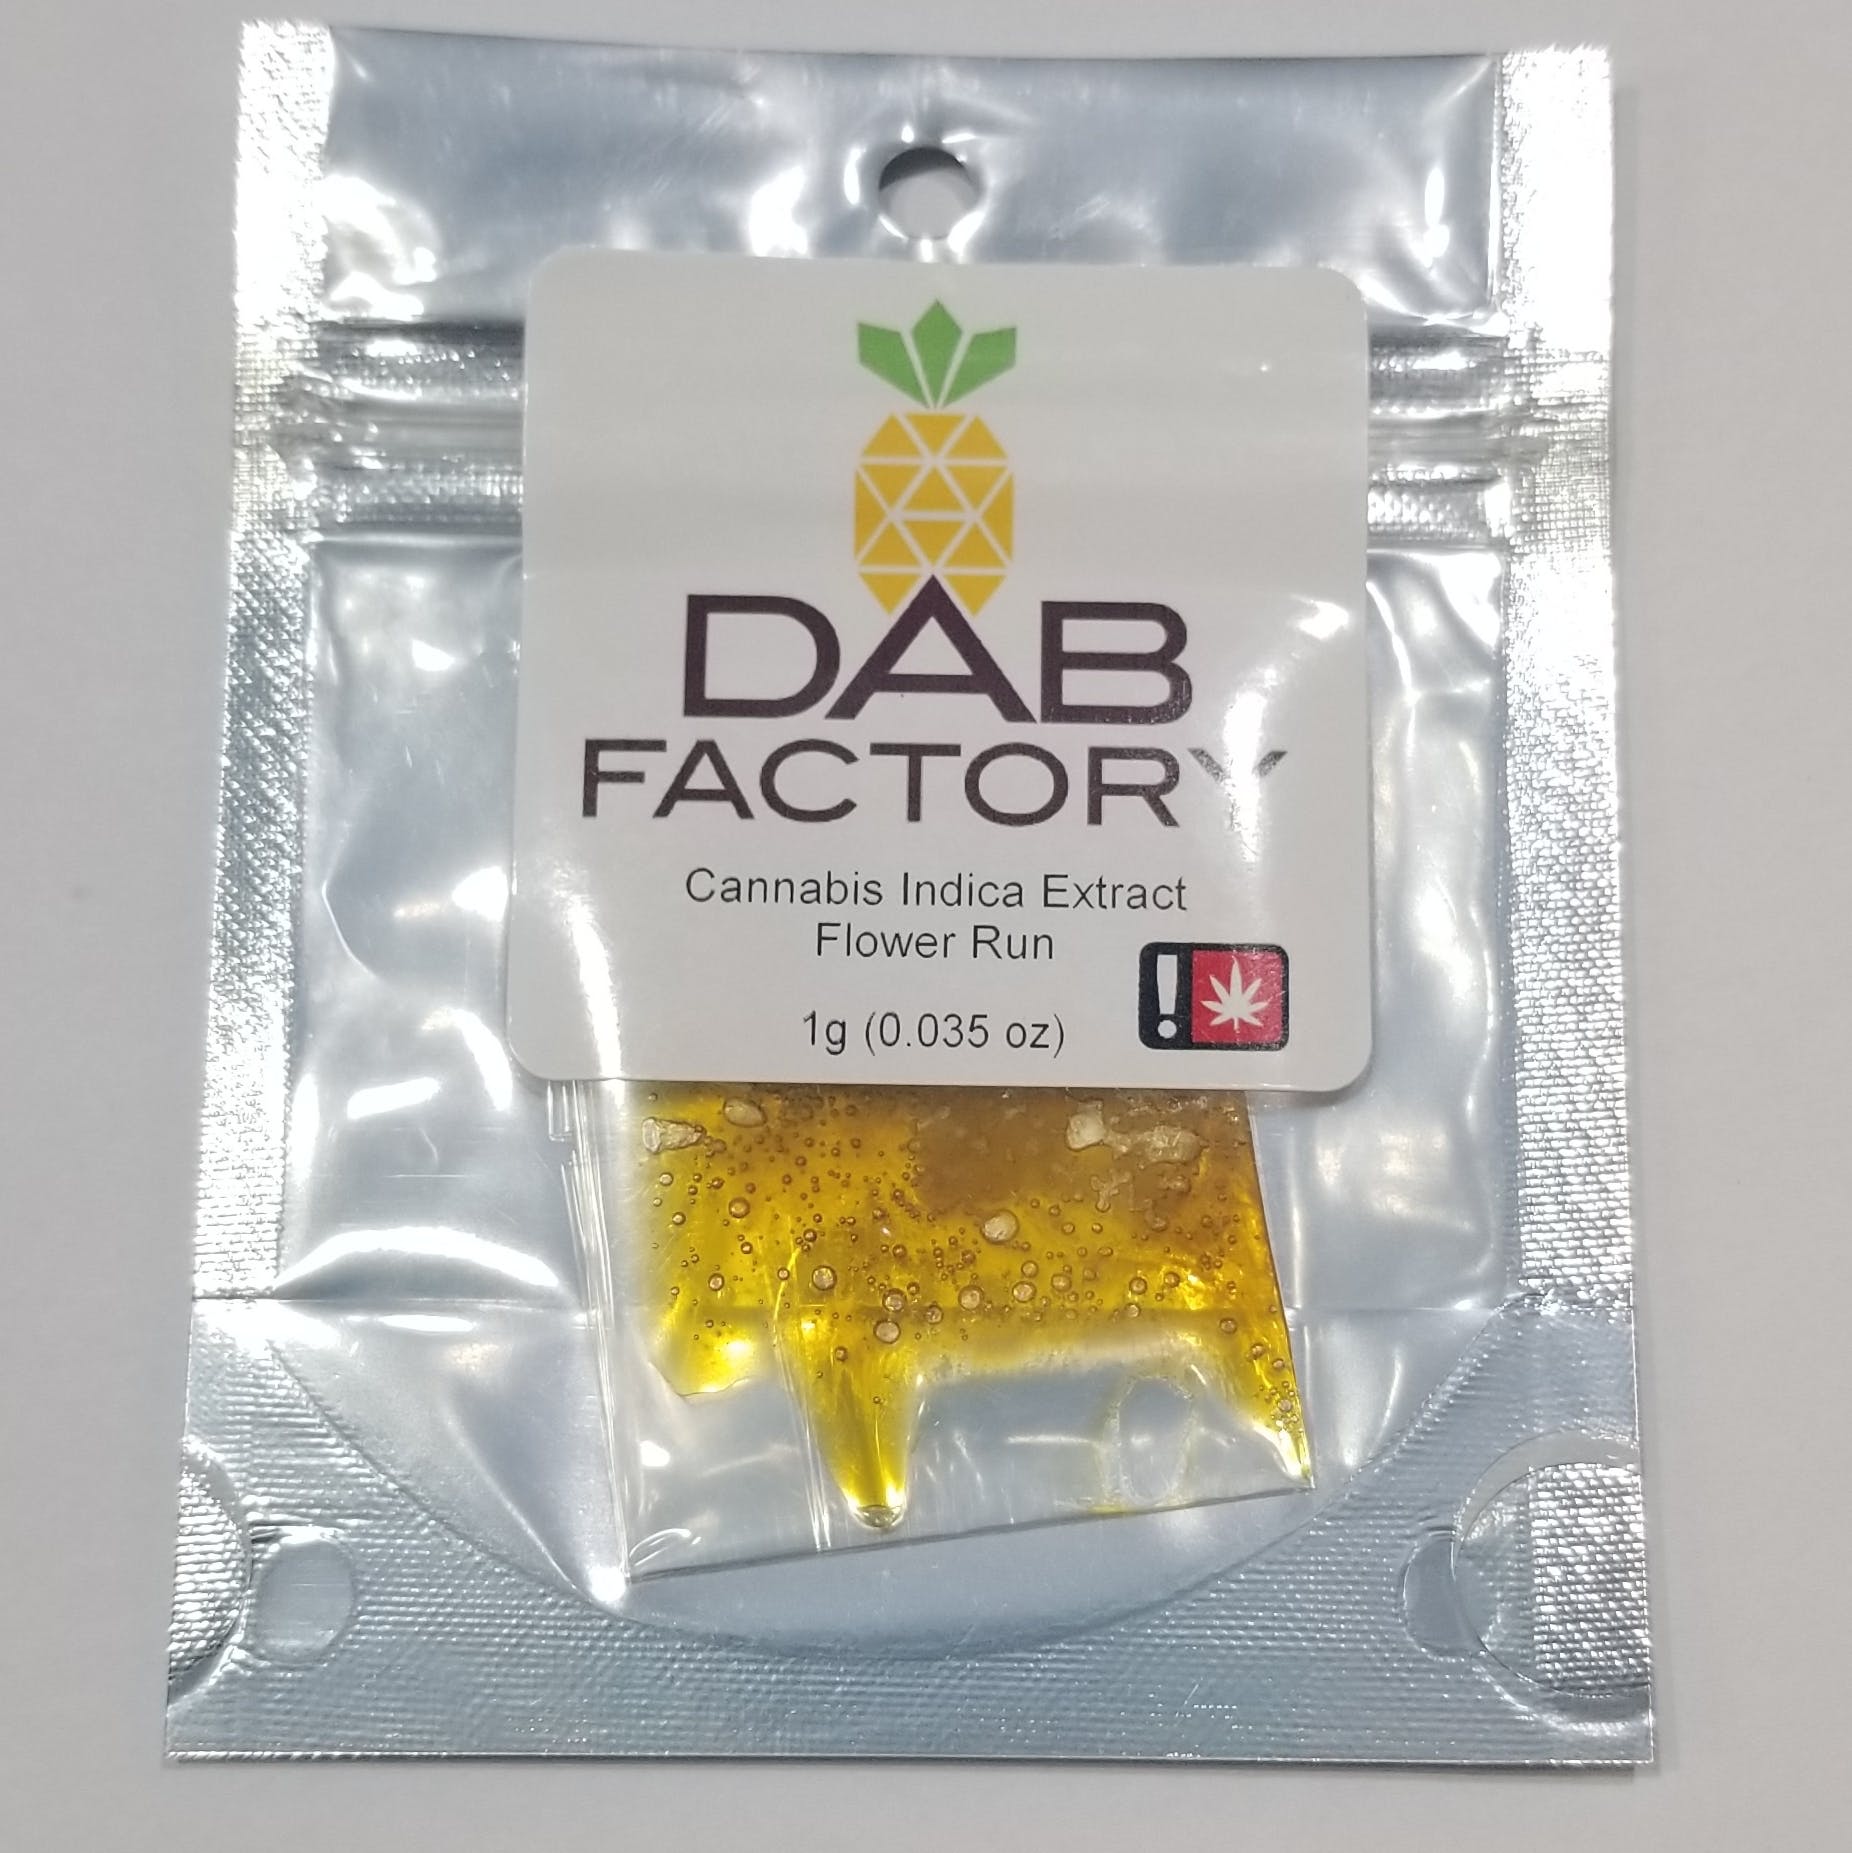 Dog Trap Extract- Dab Factory